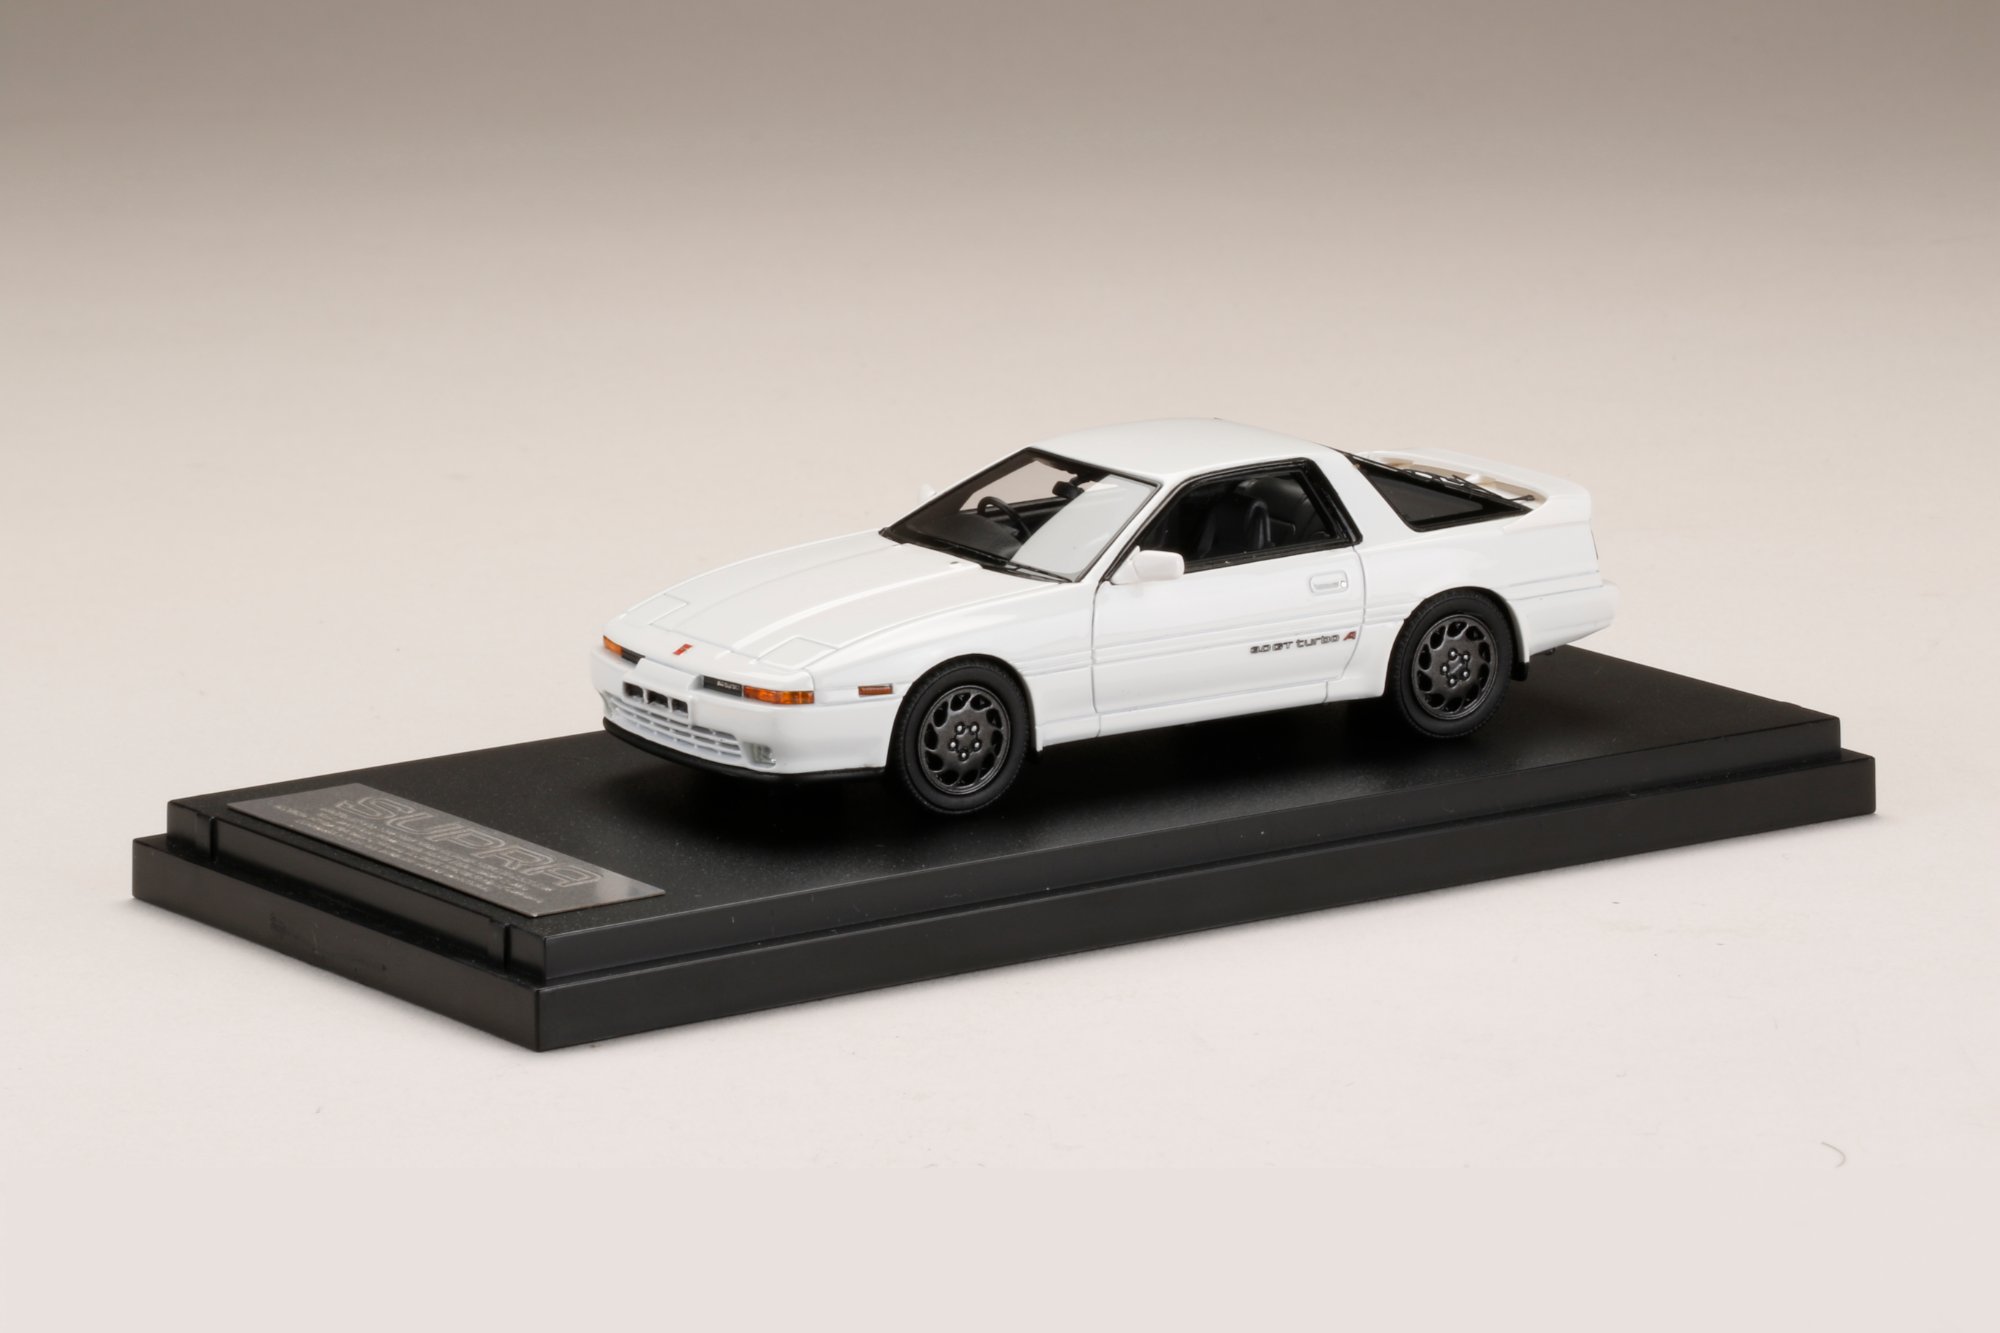 Mark43 1/43 Toyota Supra A70 2.5gt Twin Turbo Limited Super White Pearl From JP for sale online